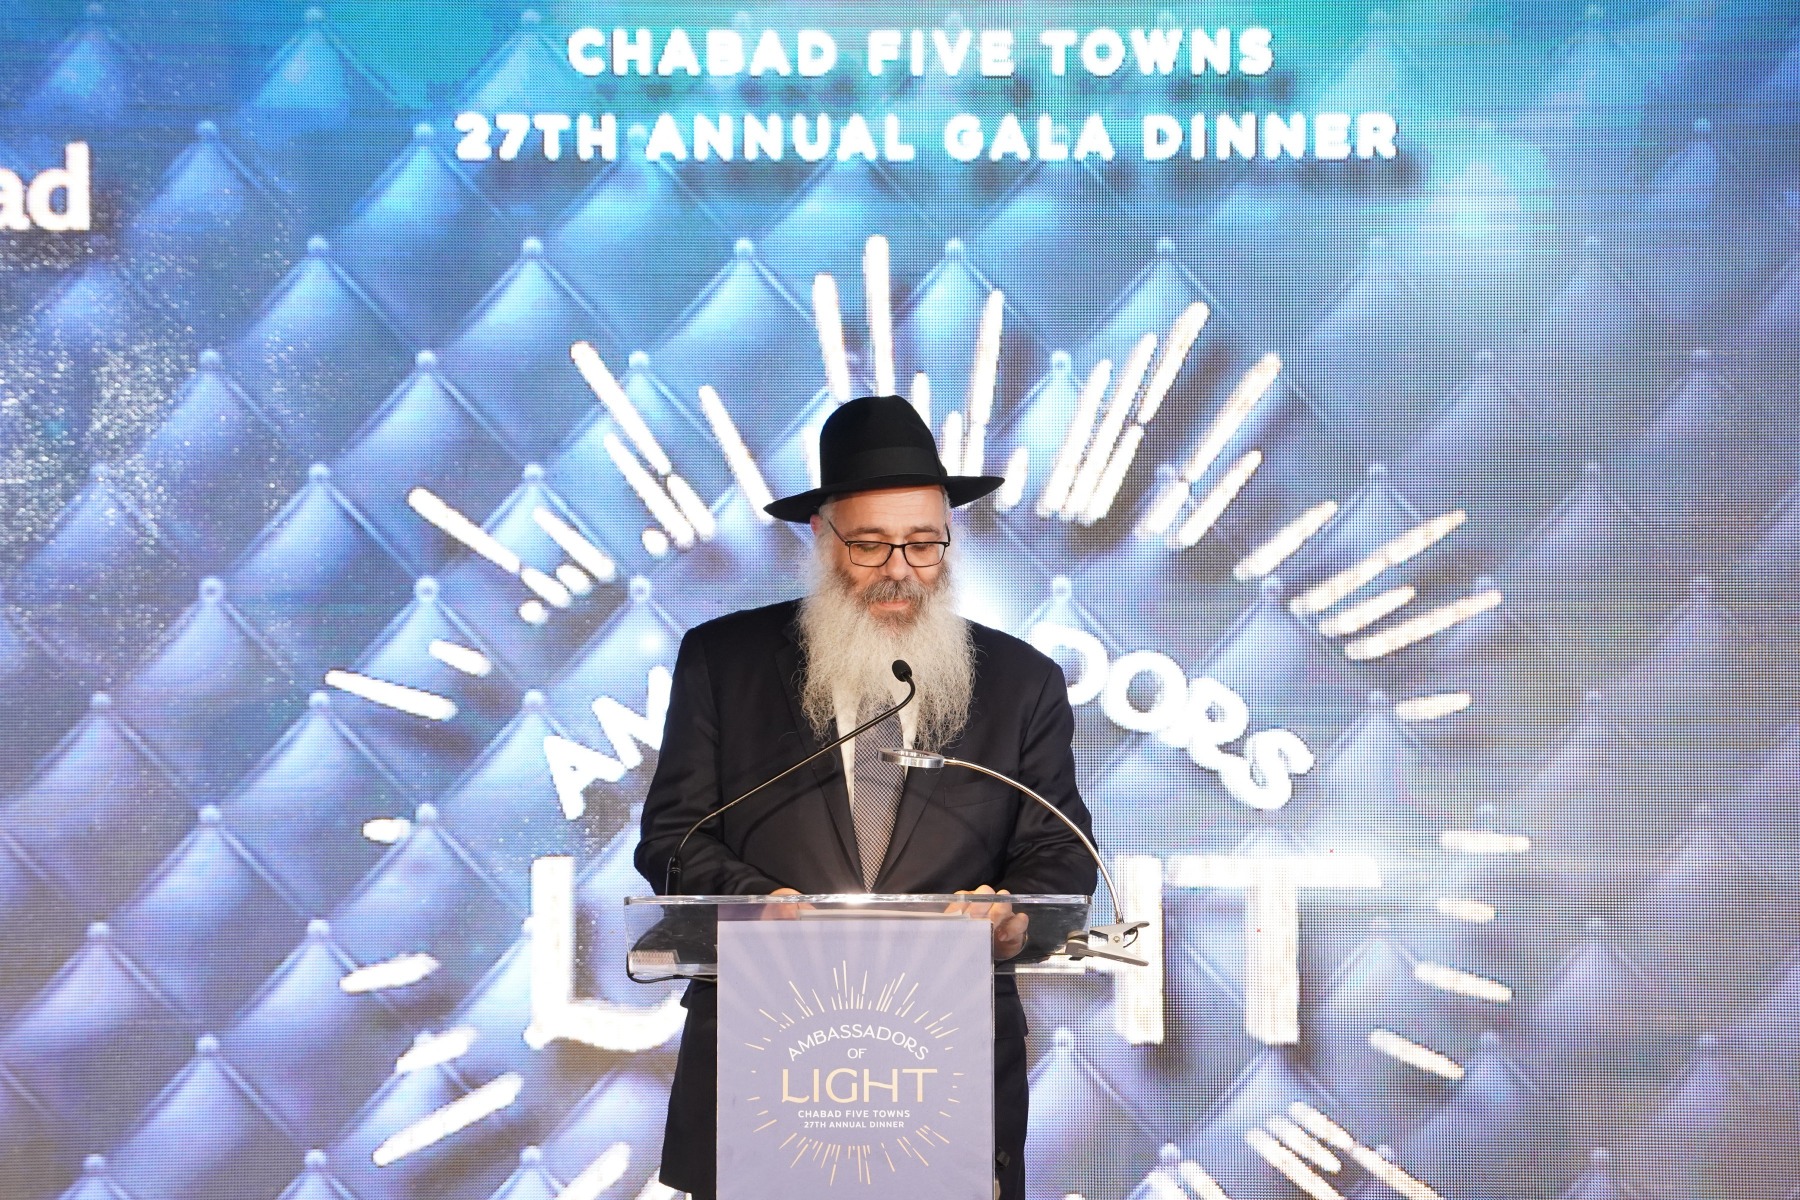 609-Chabad5Towns-2.15.22